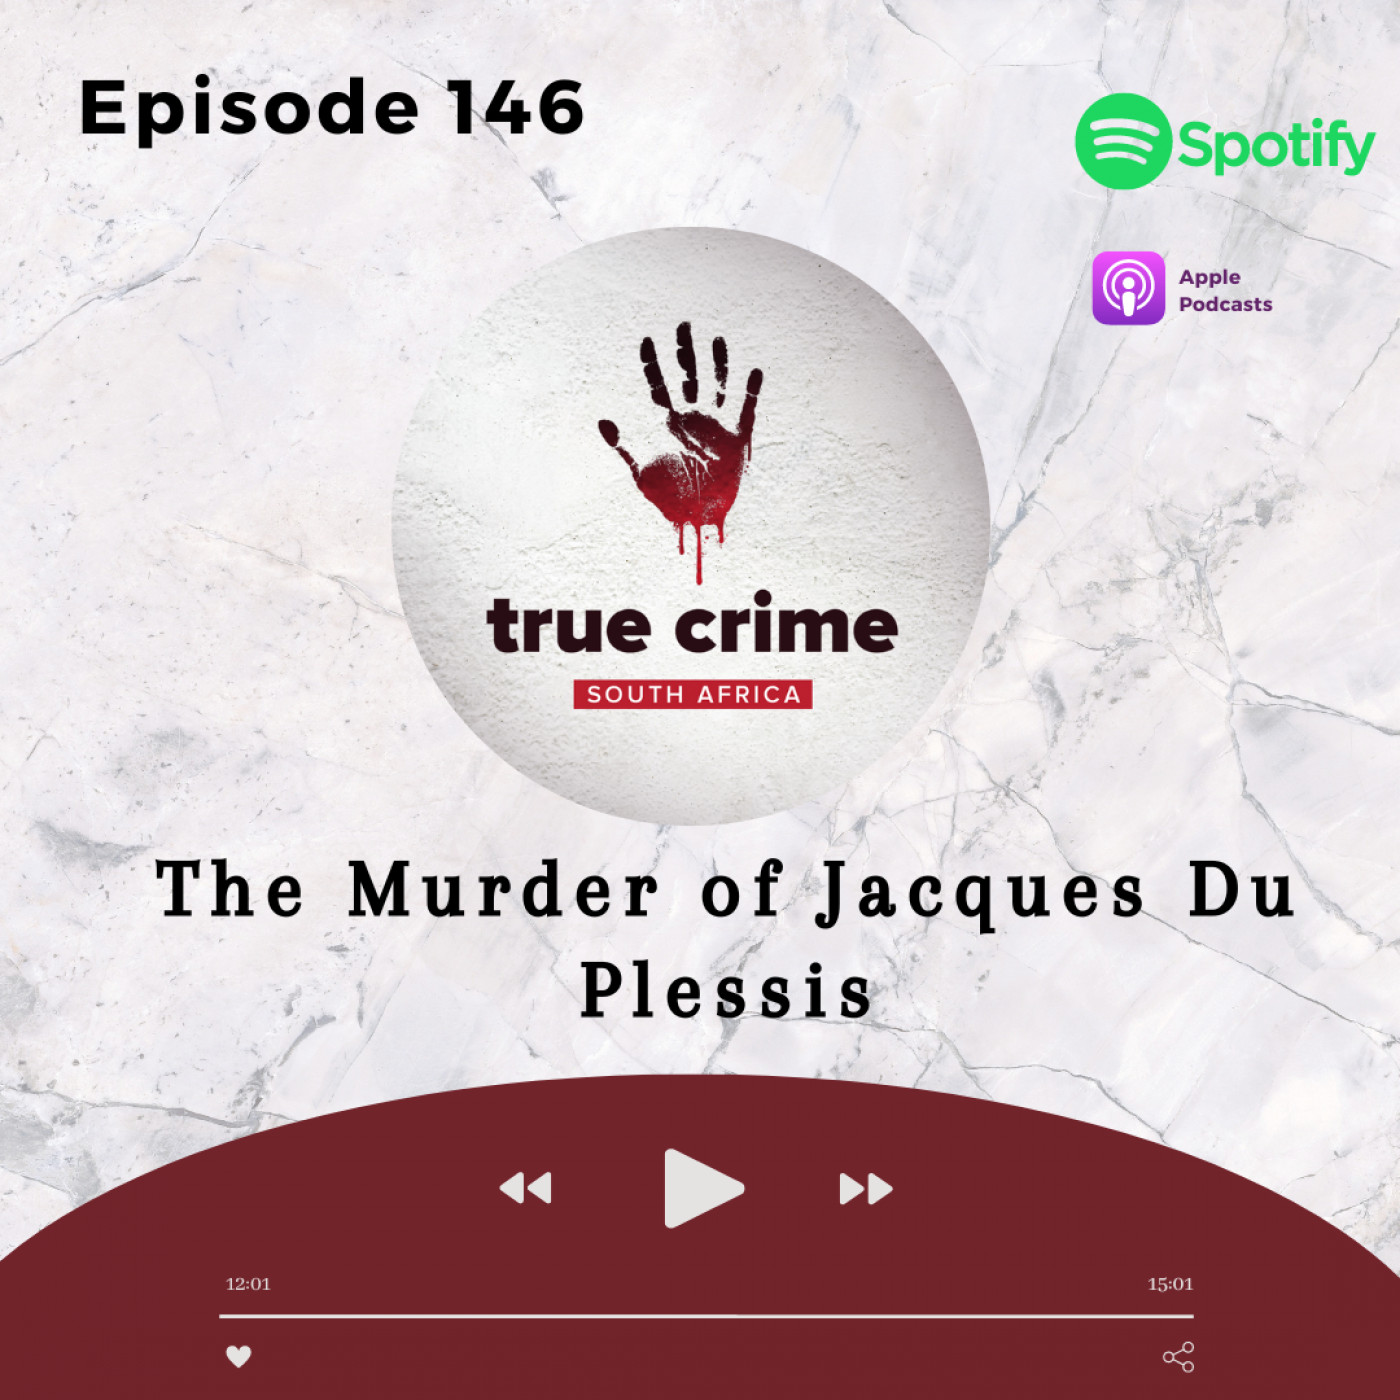 Episode 146 The Murder of Jacques du Plessis